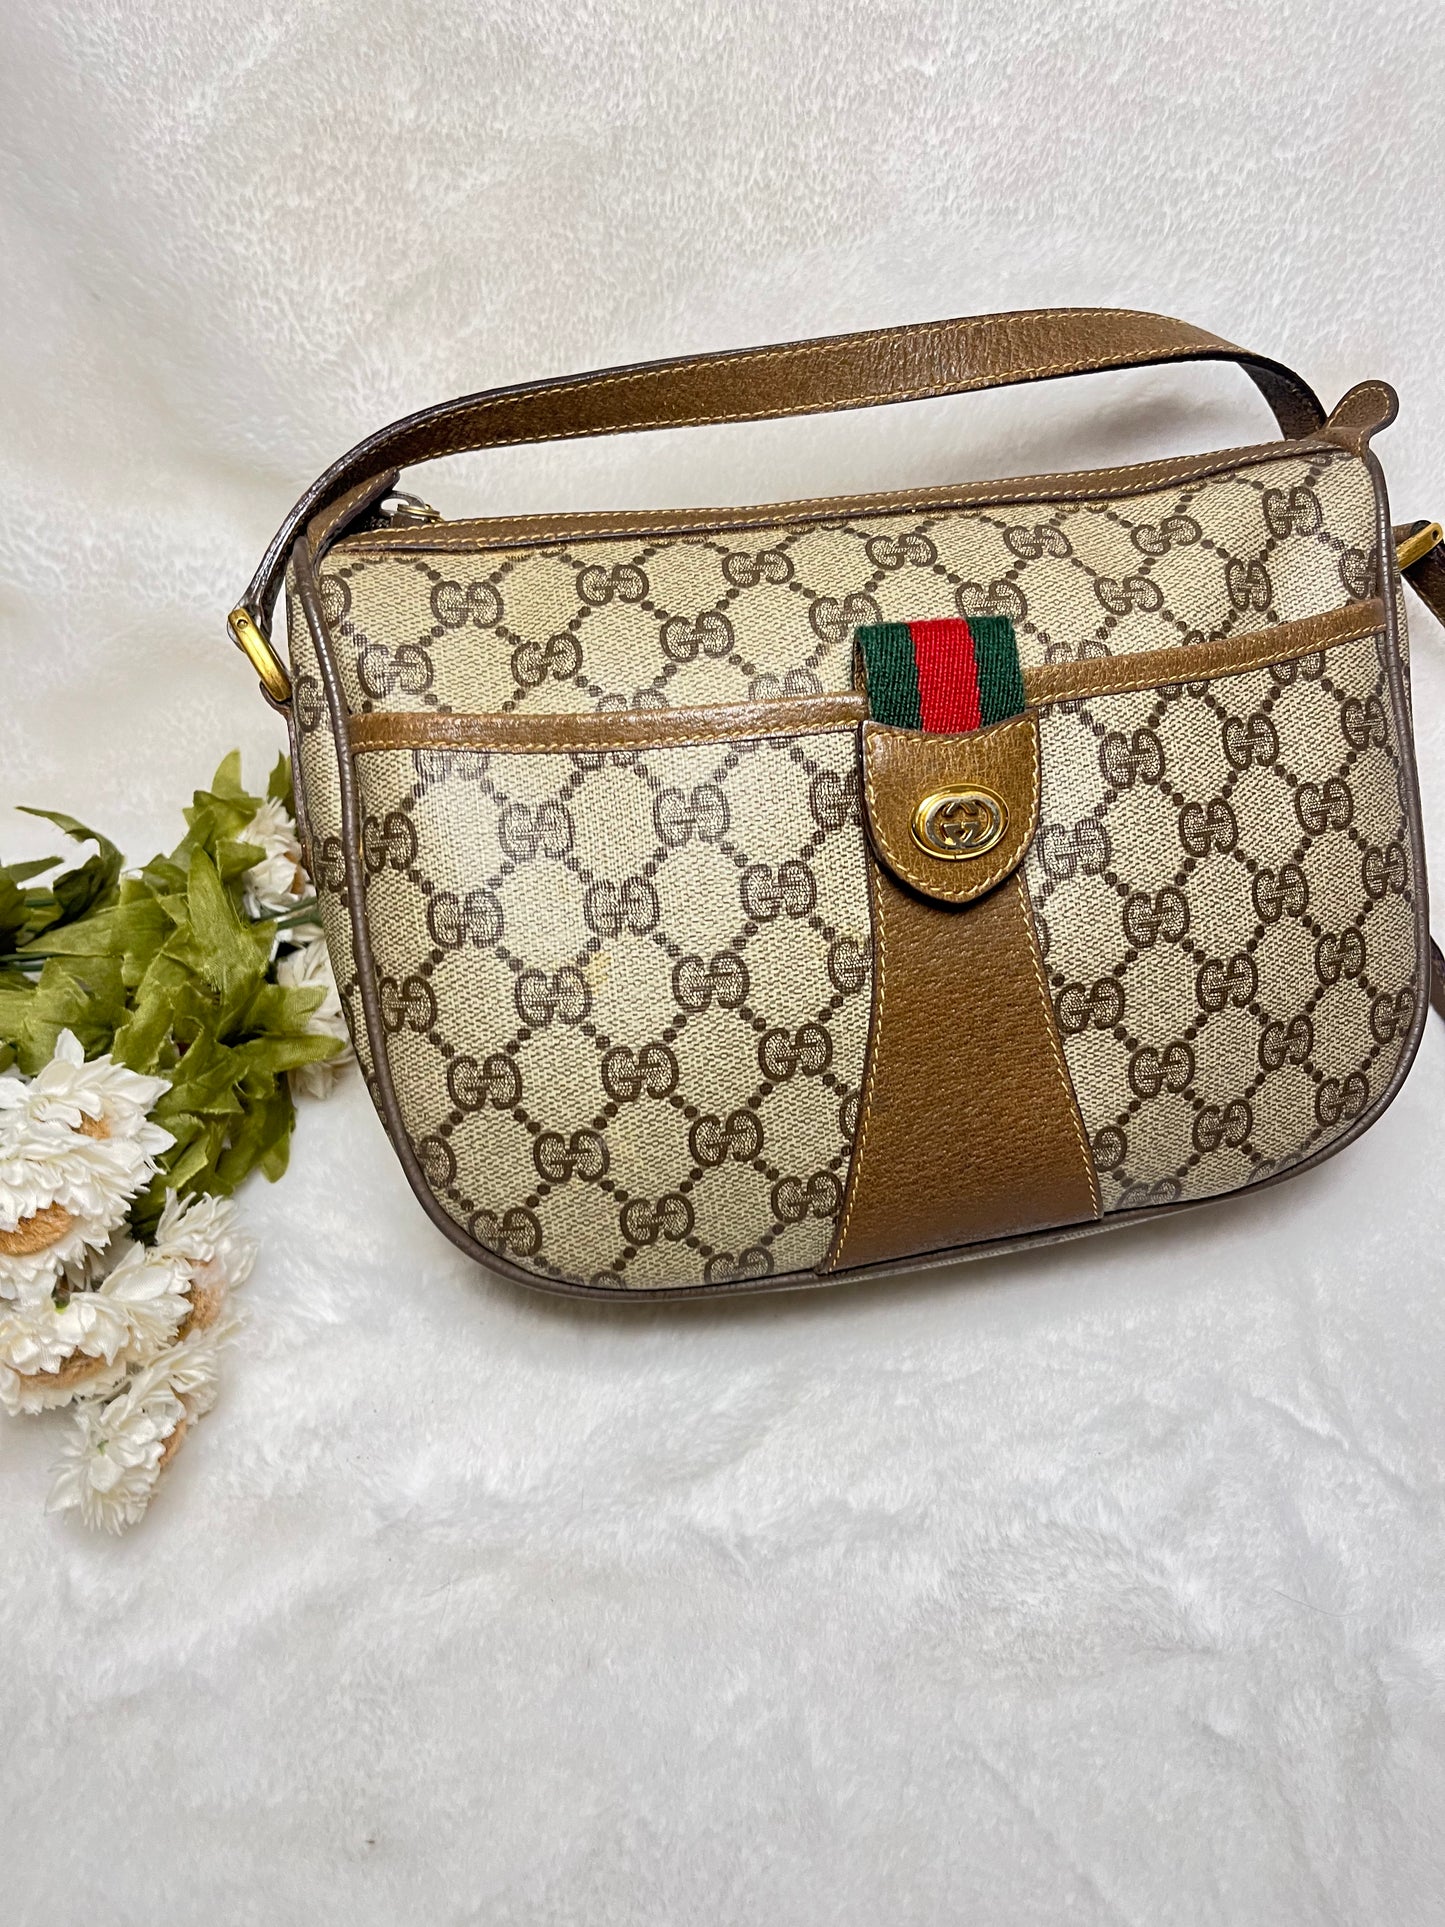 Authentic pre-owned Gucci Sherry line crossbody shoulder bag